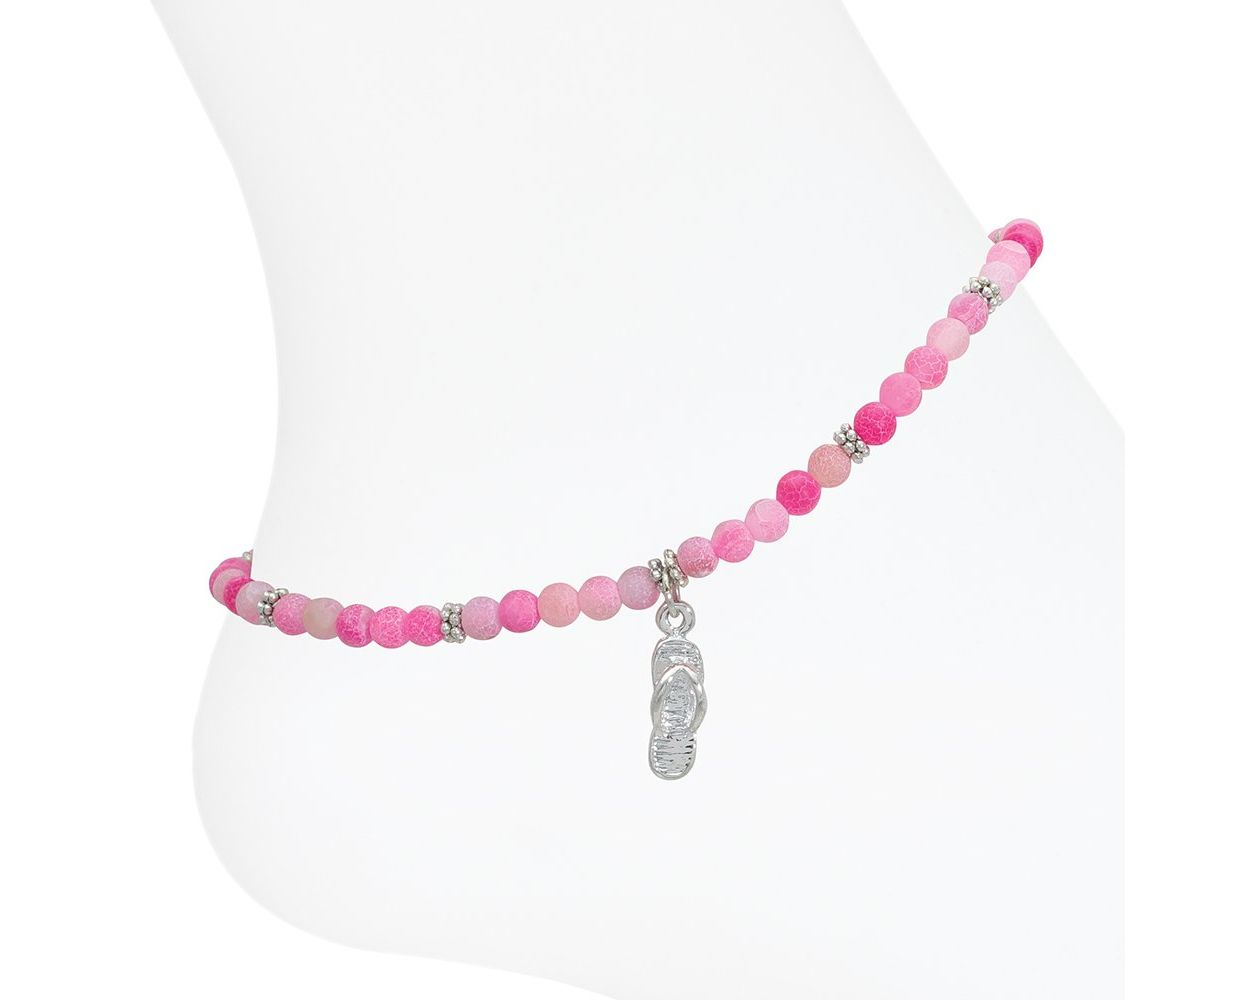 Silver Flip Flop with Pink Beads - Anklet - Mellow Monkey